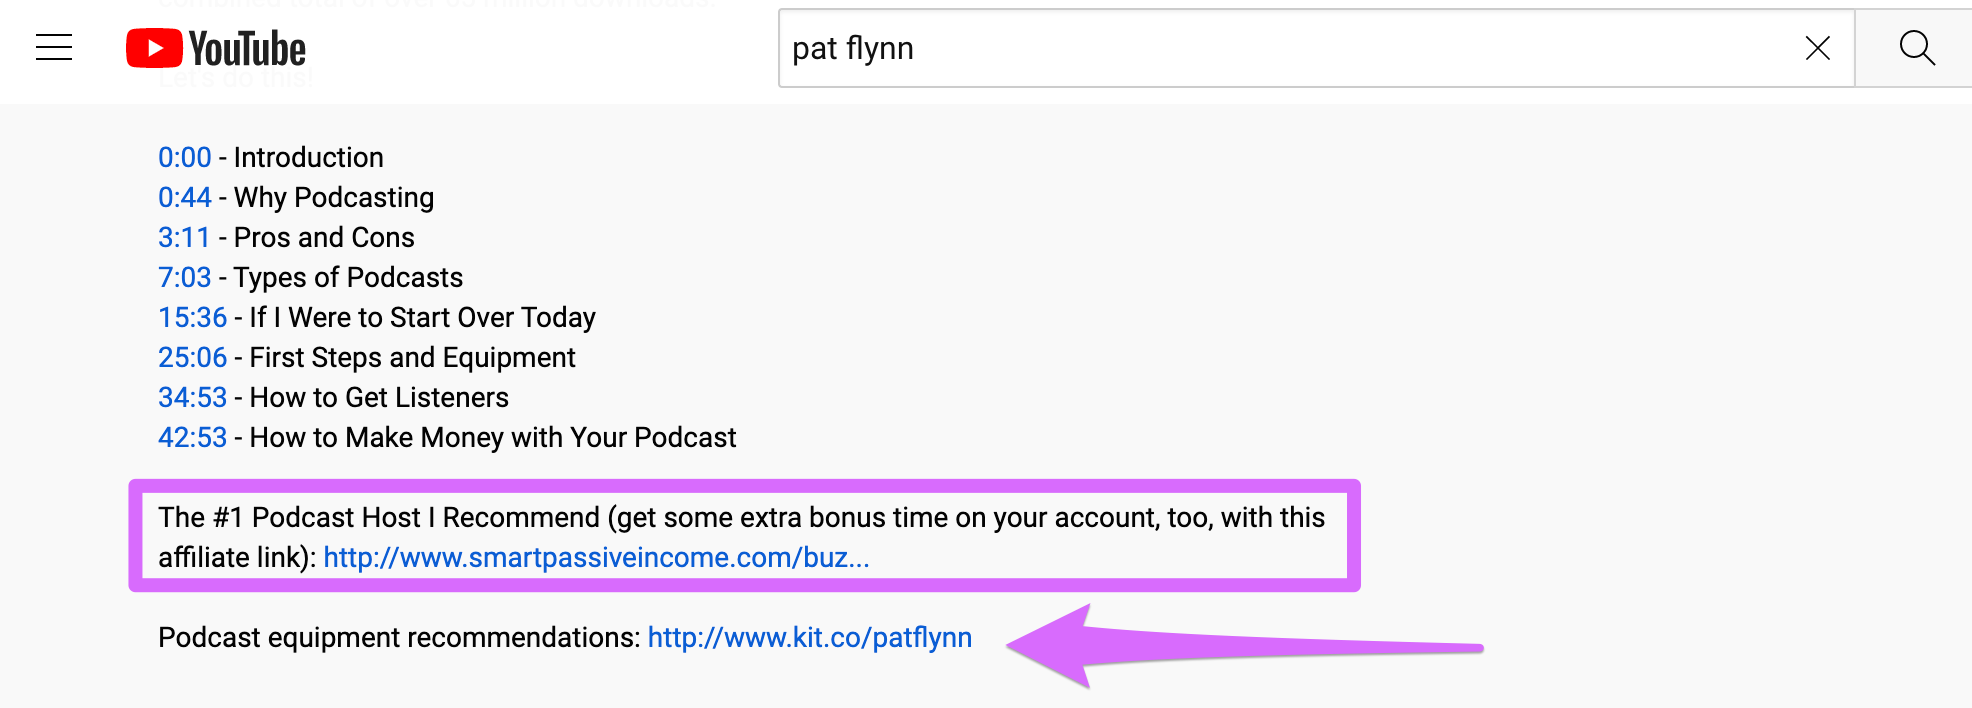 pat flynn youtube podcast recommendations